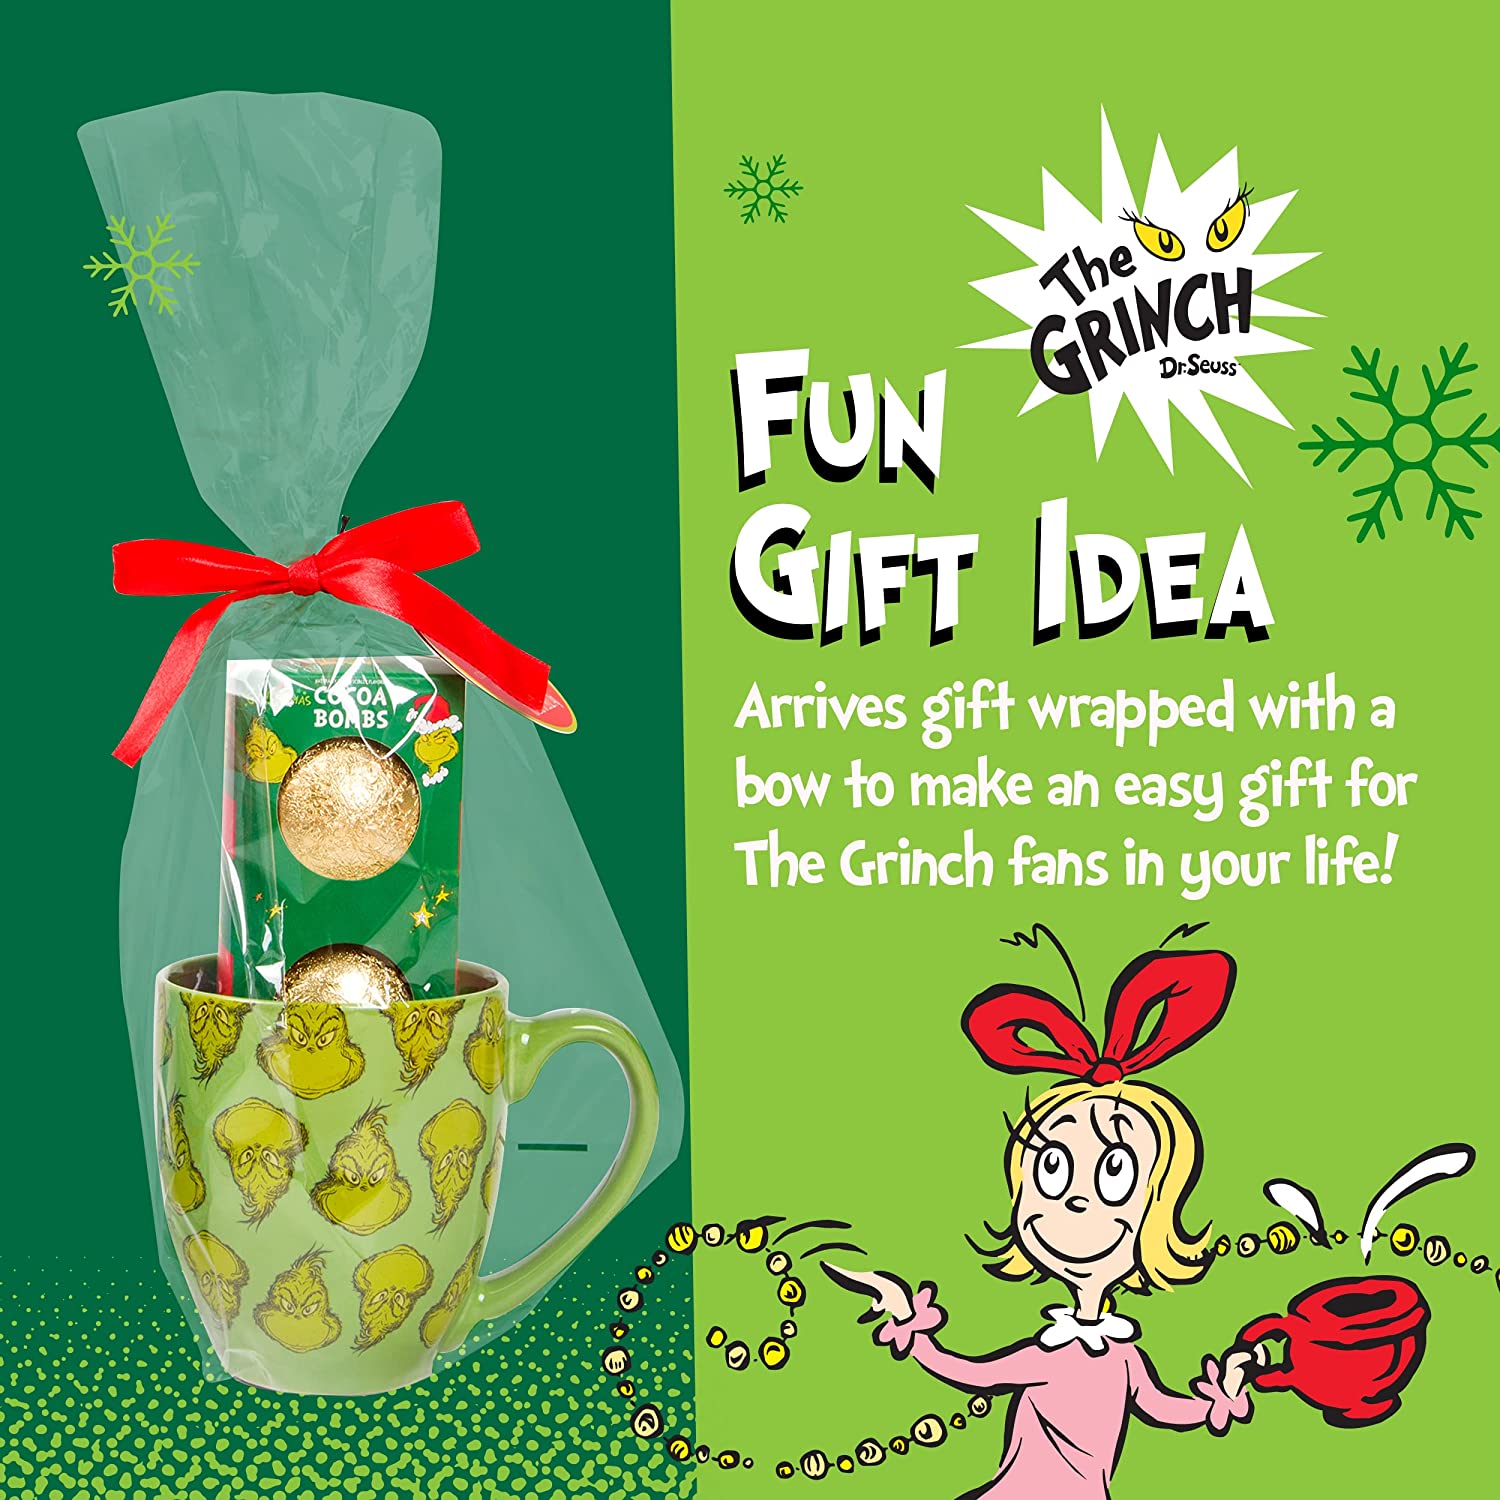 Grinch Cocoa Bomb Mug Set - 2 Pack – Ten Acre Gifts